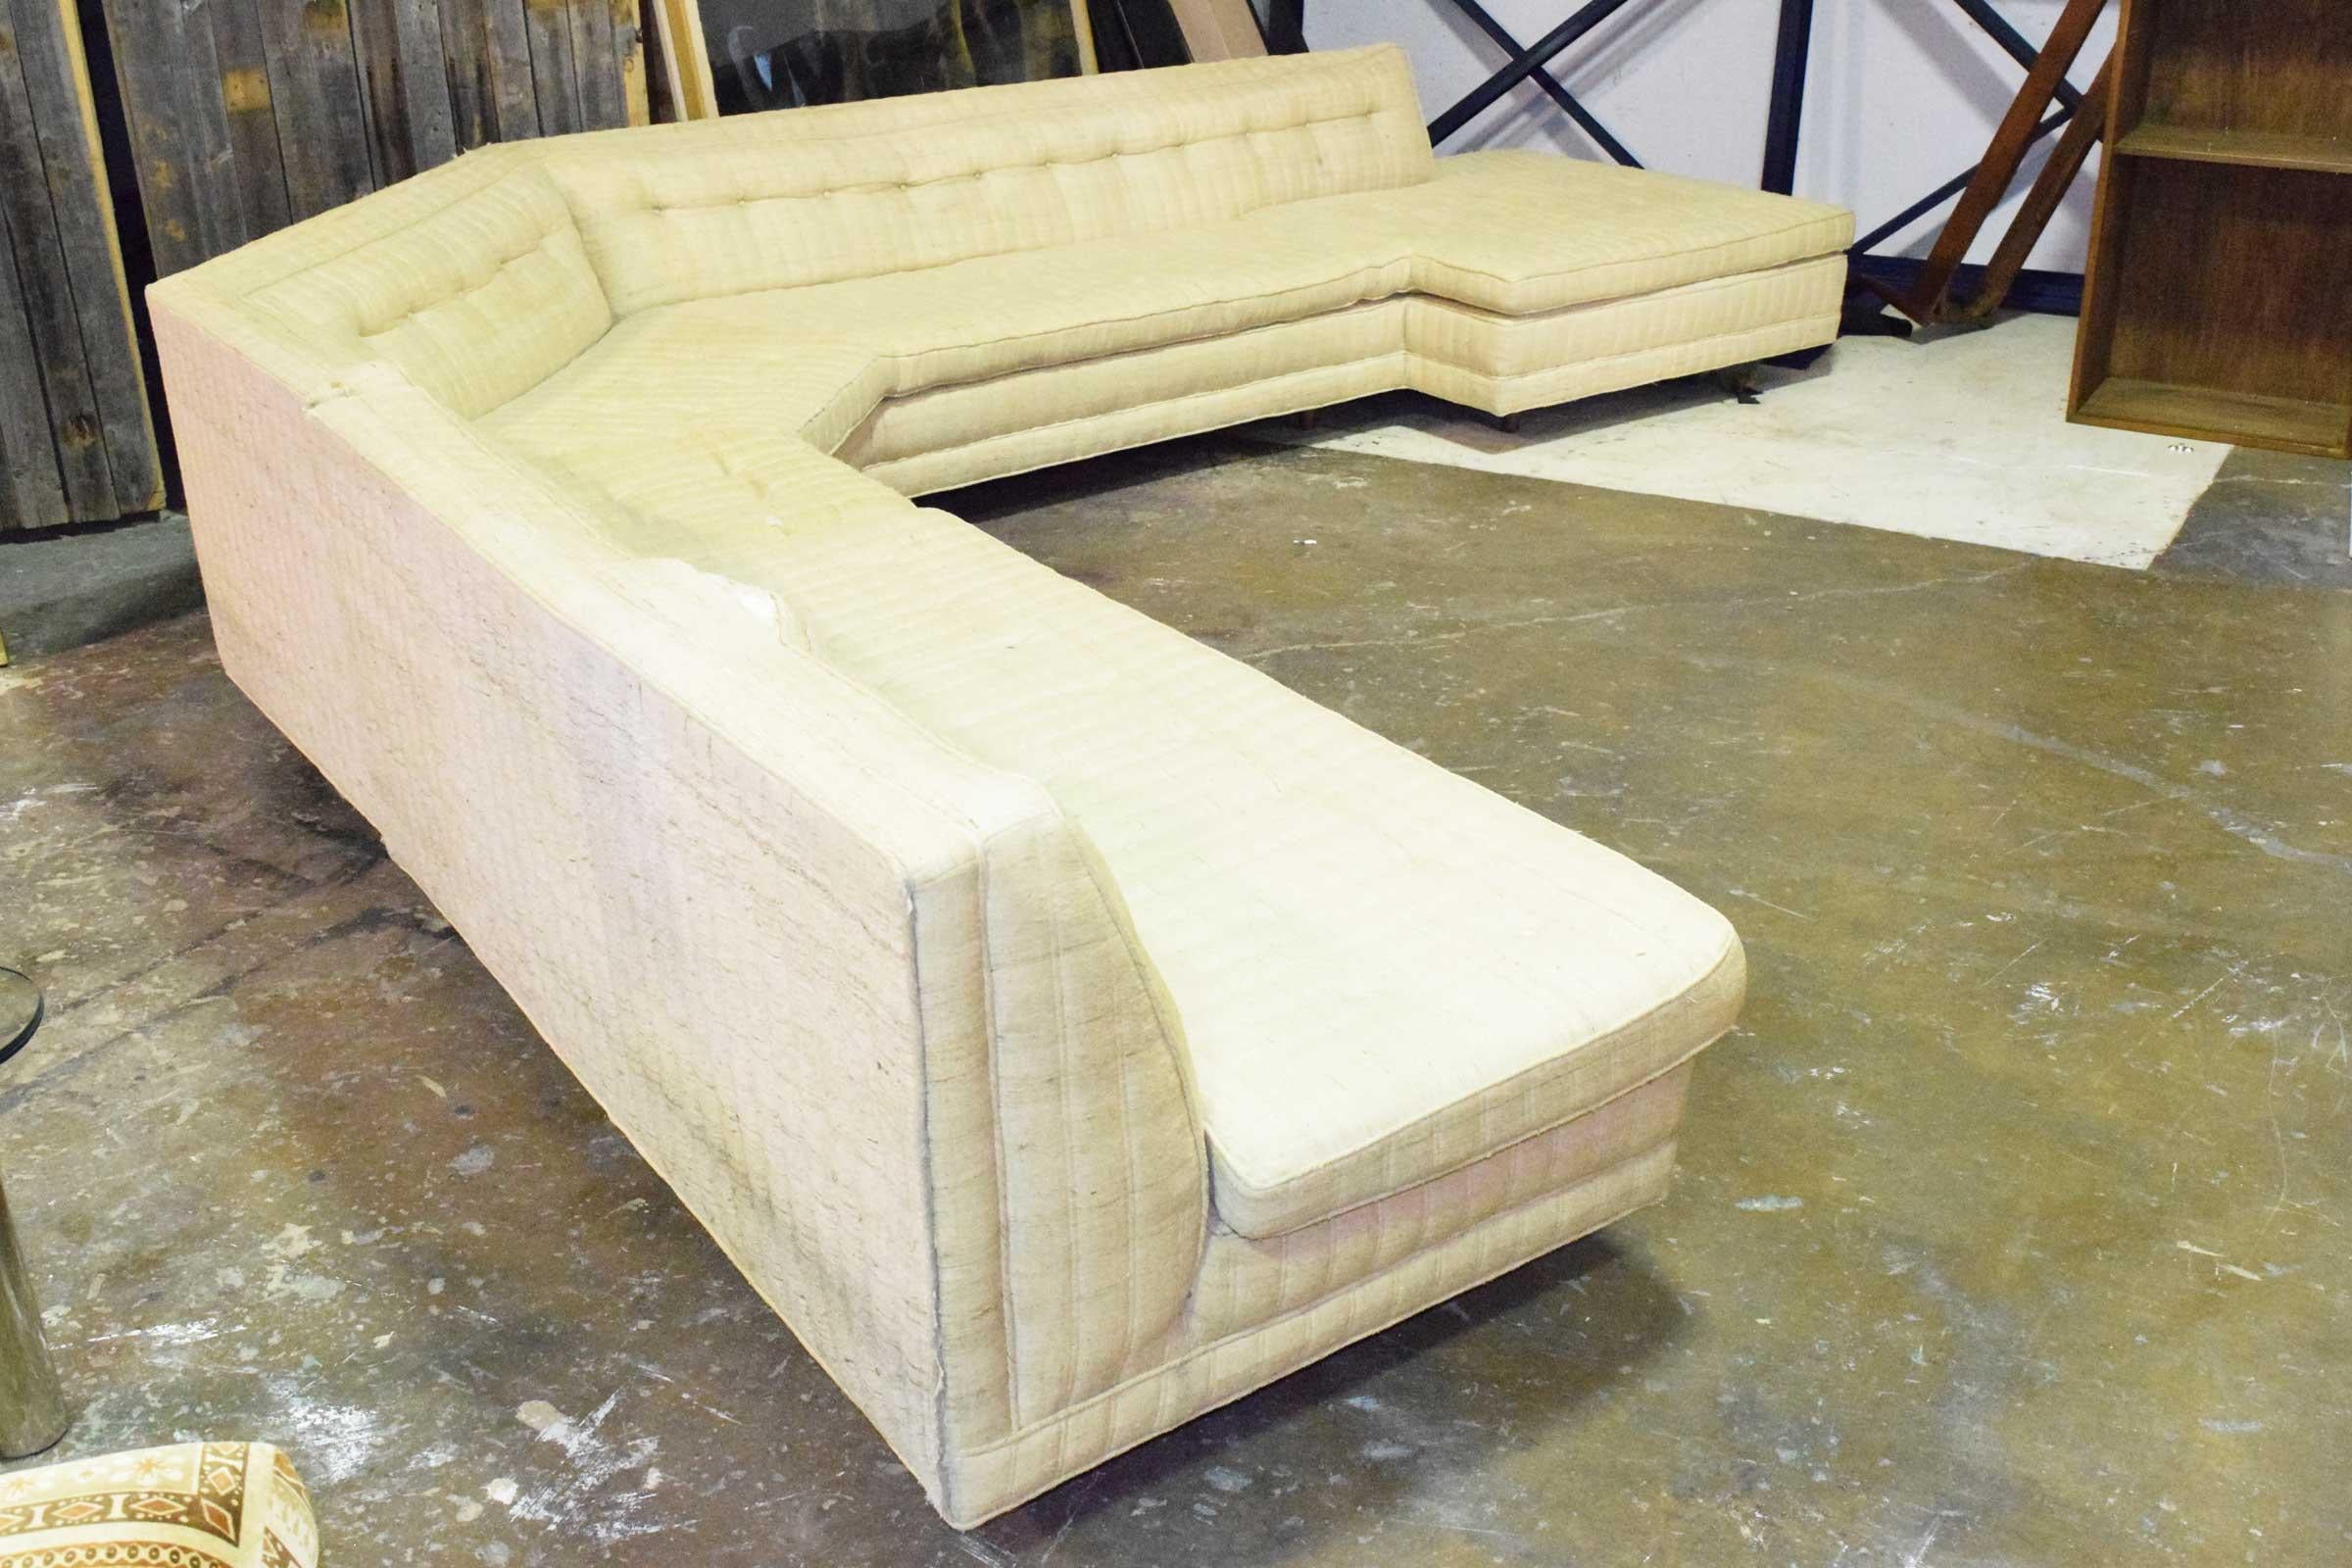 With an imagination, this sofa would be stunning once restored. It is a hard to find large sectional by Harvey Probber. Very sophisticated, will make a statement in any room. Inviting for large groups with plenty of seating. We can offer full